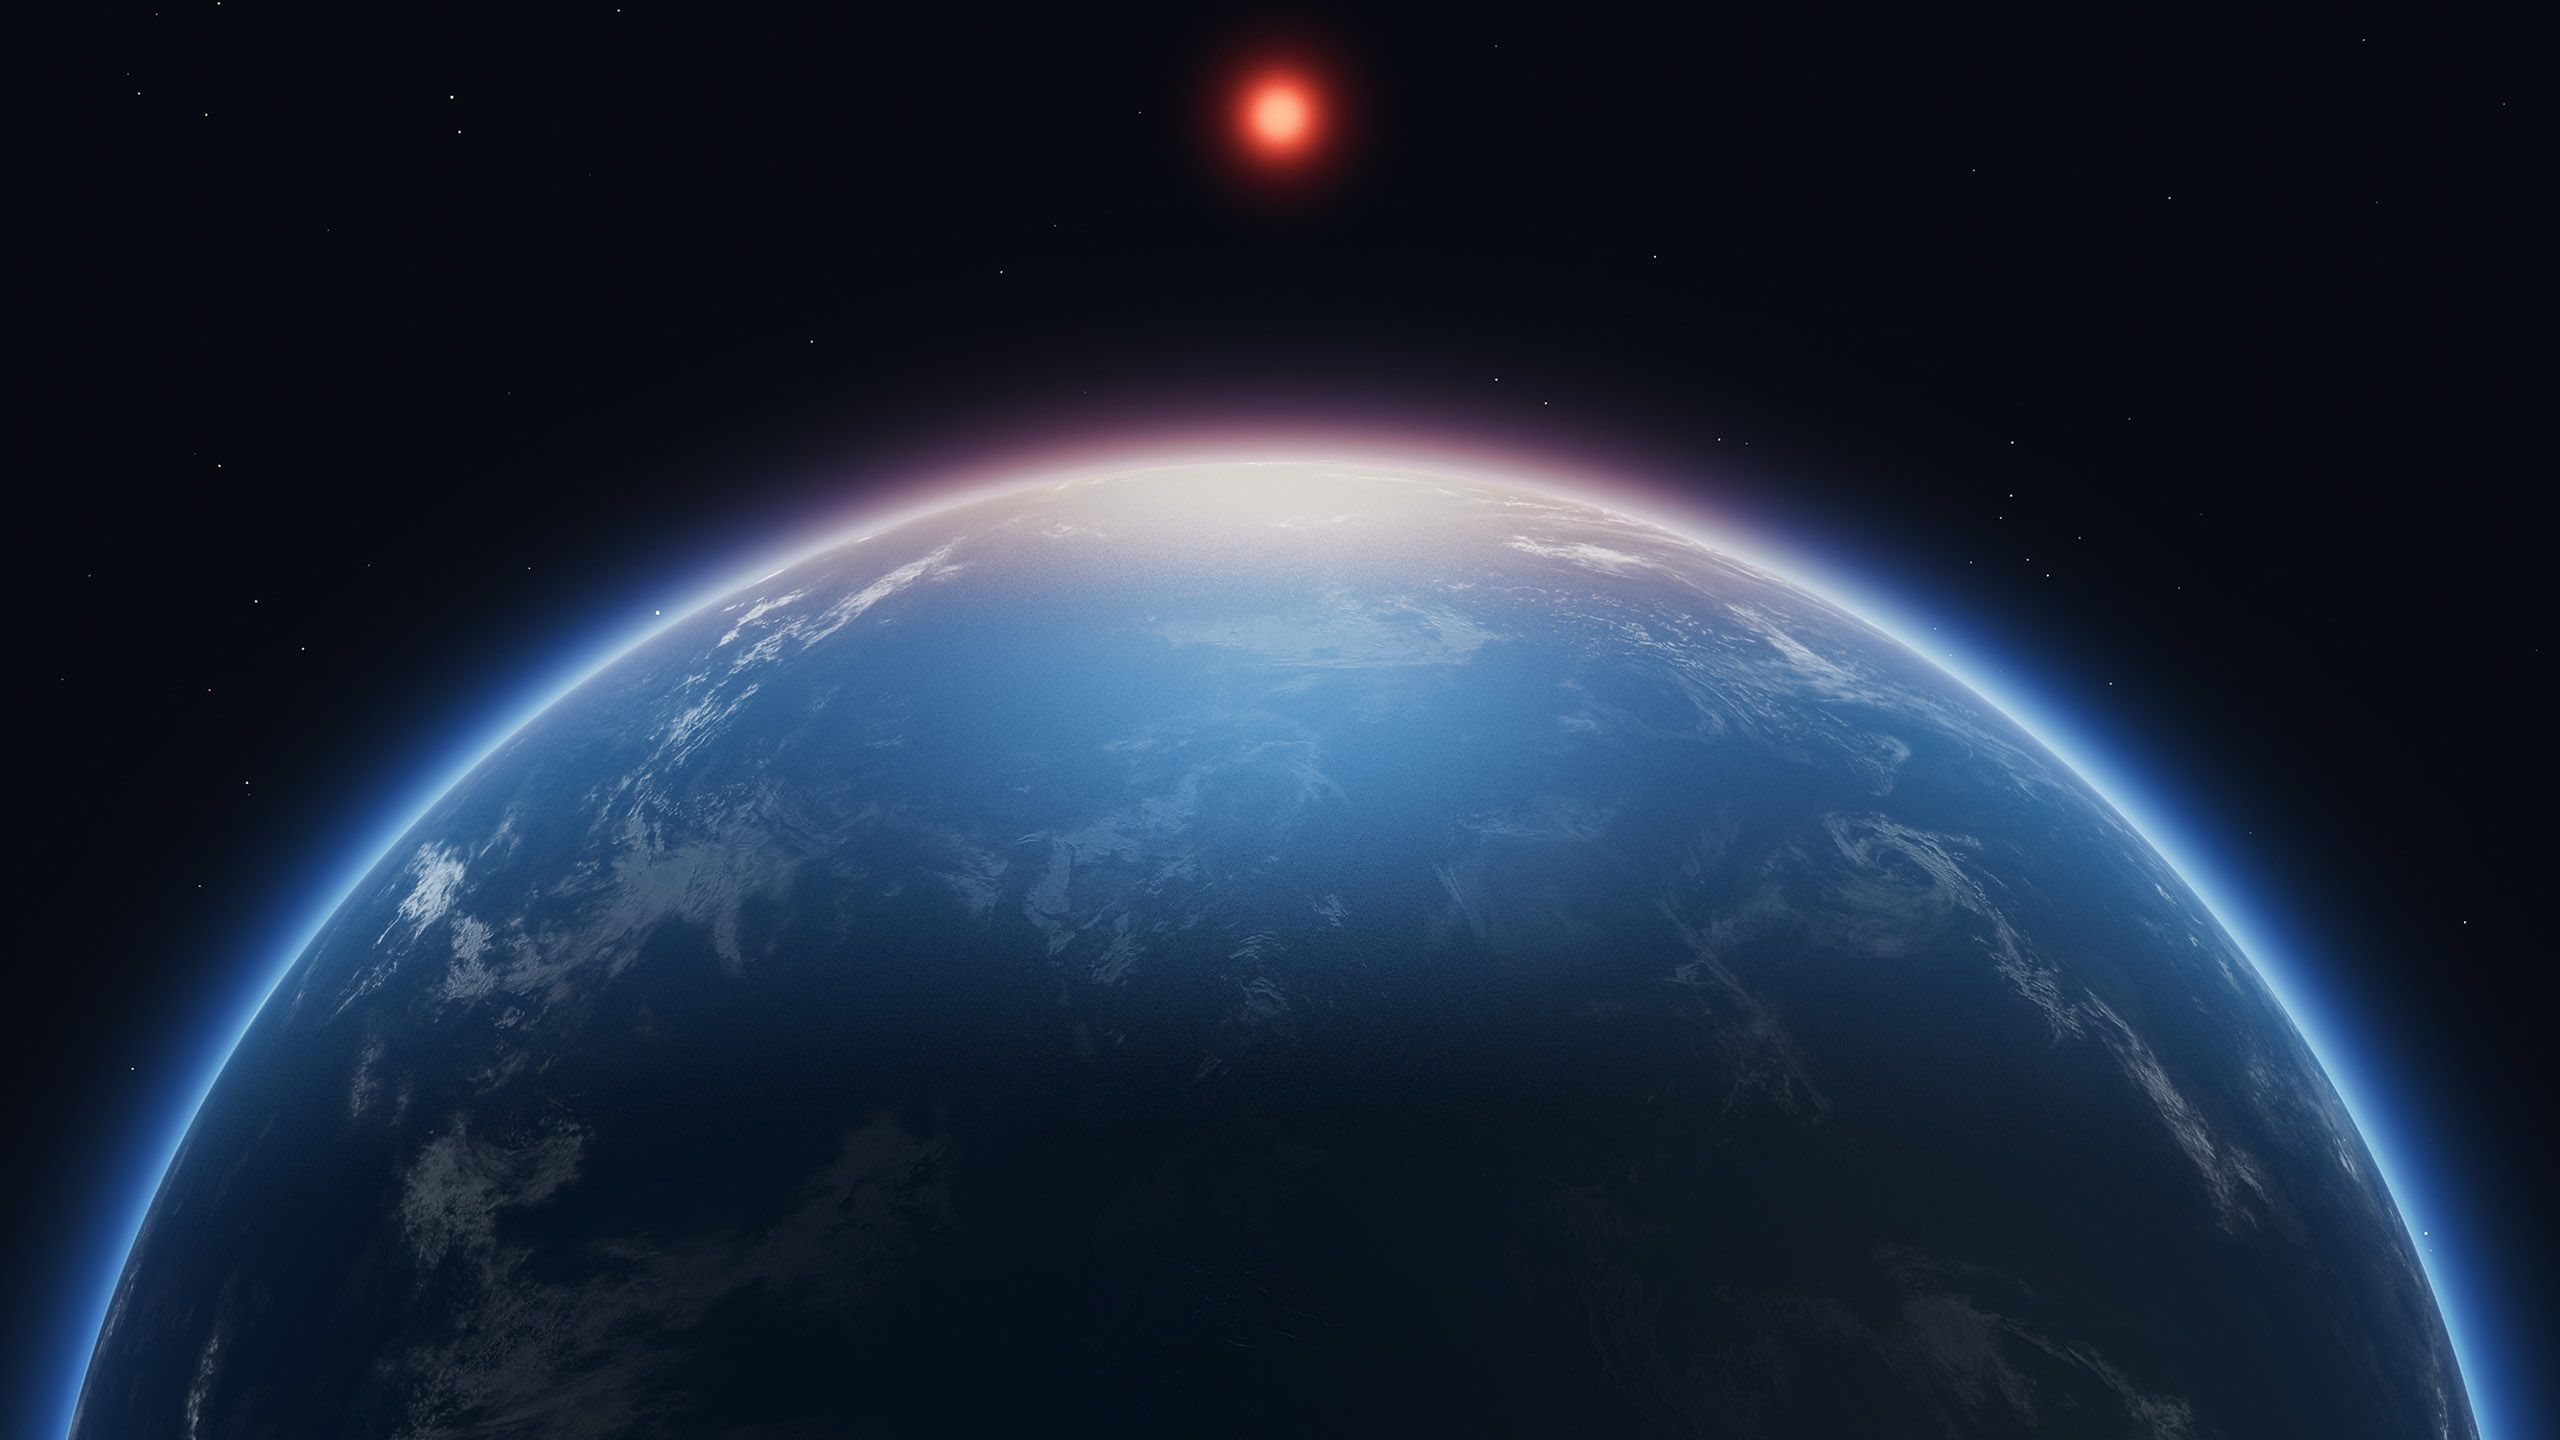 Artist's impression of the Hycean exoplanet K2-18 b.